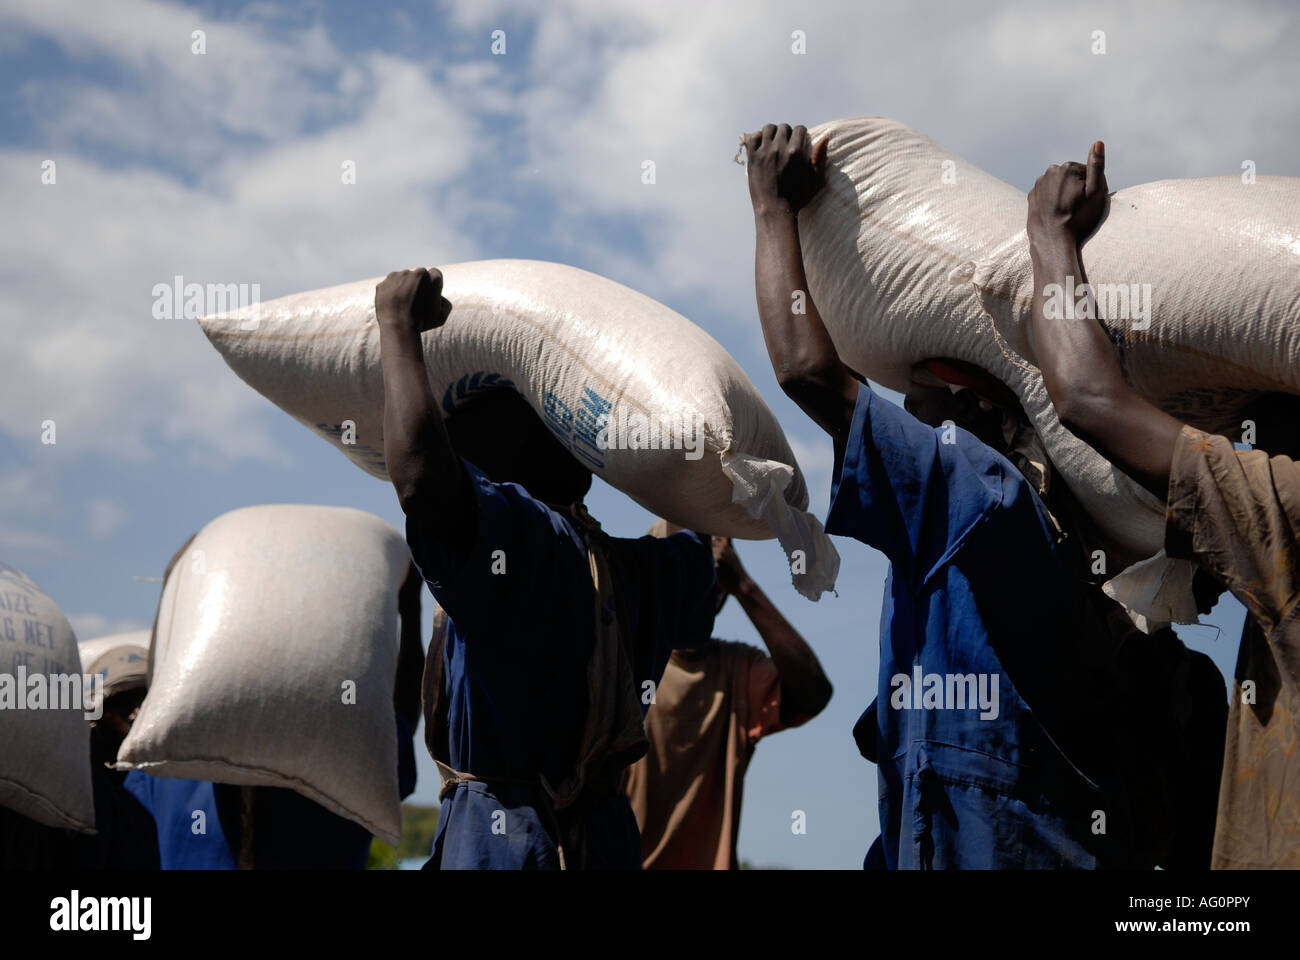 Carrying Head Refugee High Resolution Stock Photography and Images - Alamy